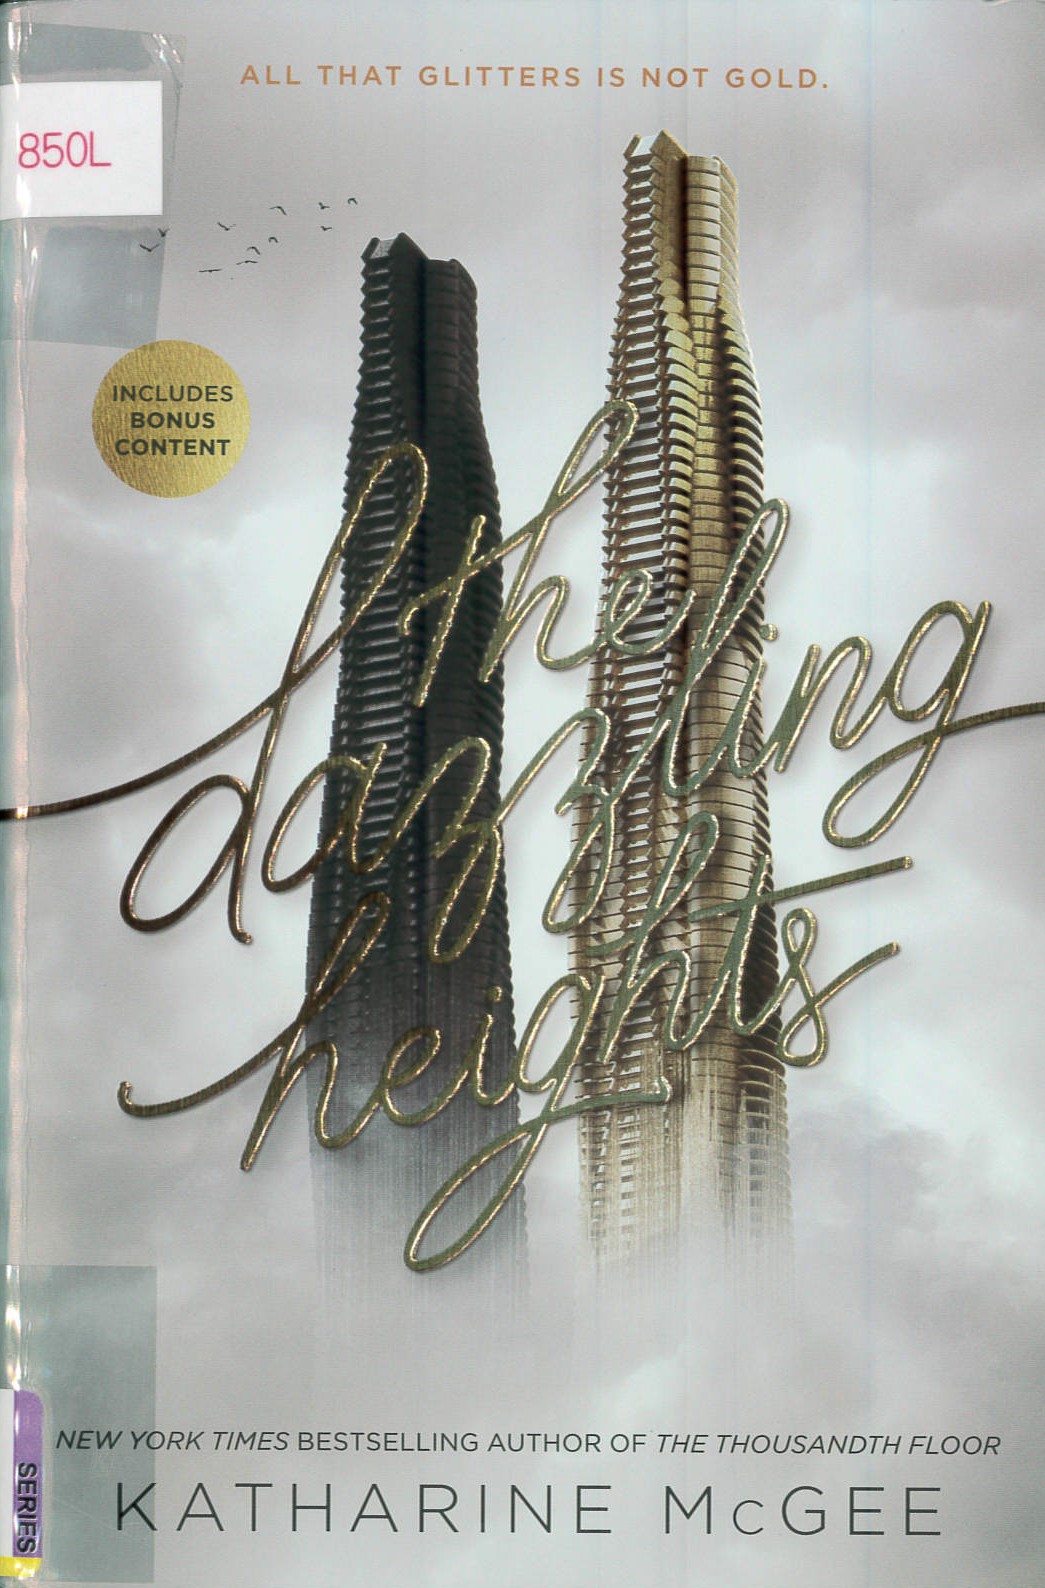 The dazzling heights /